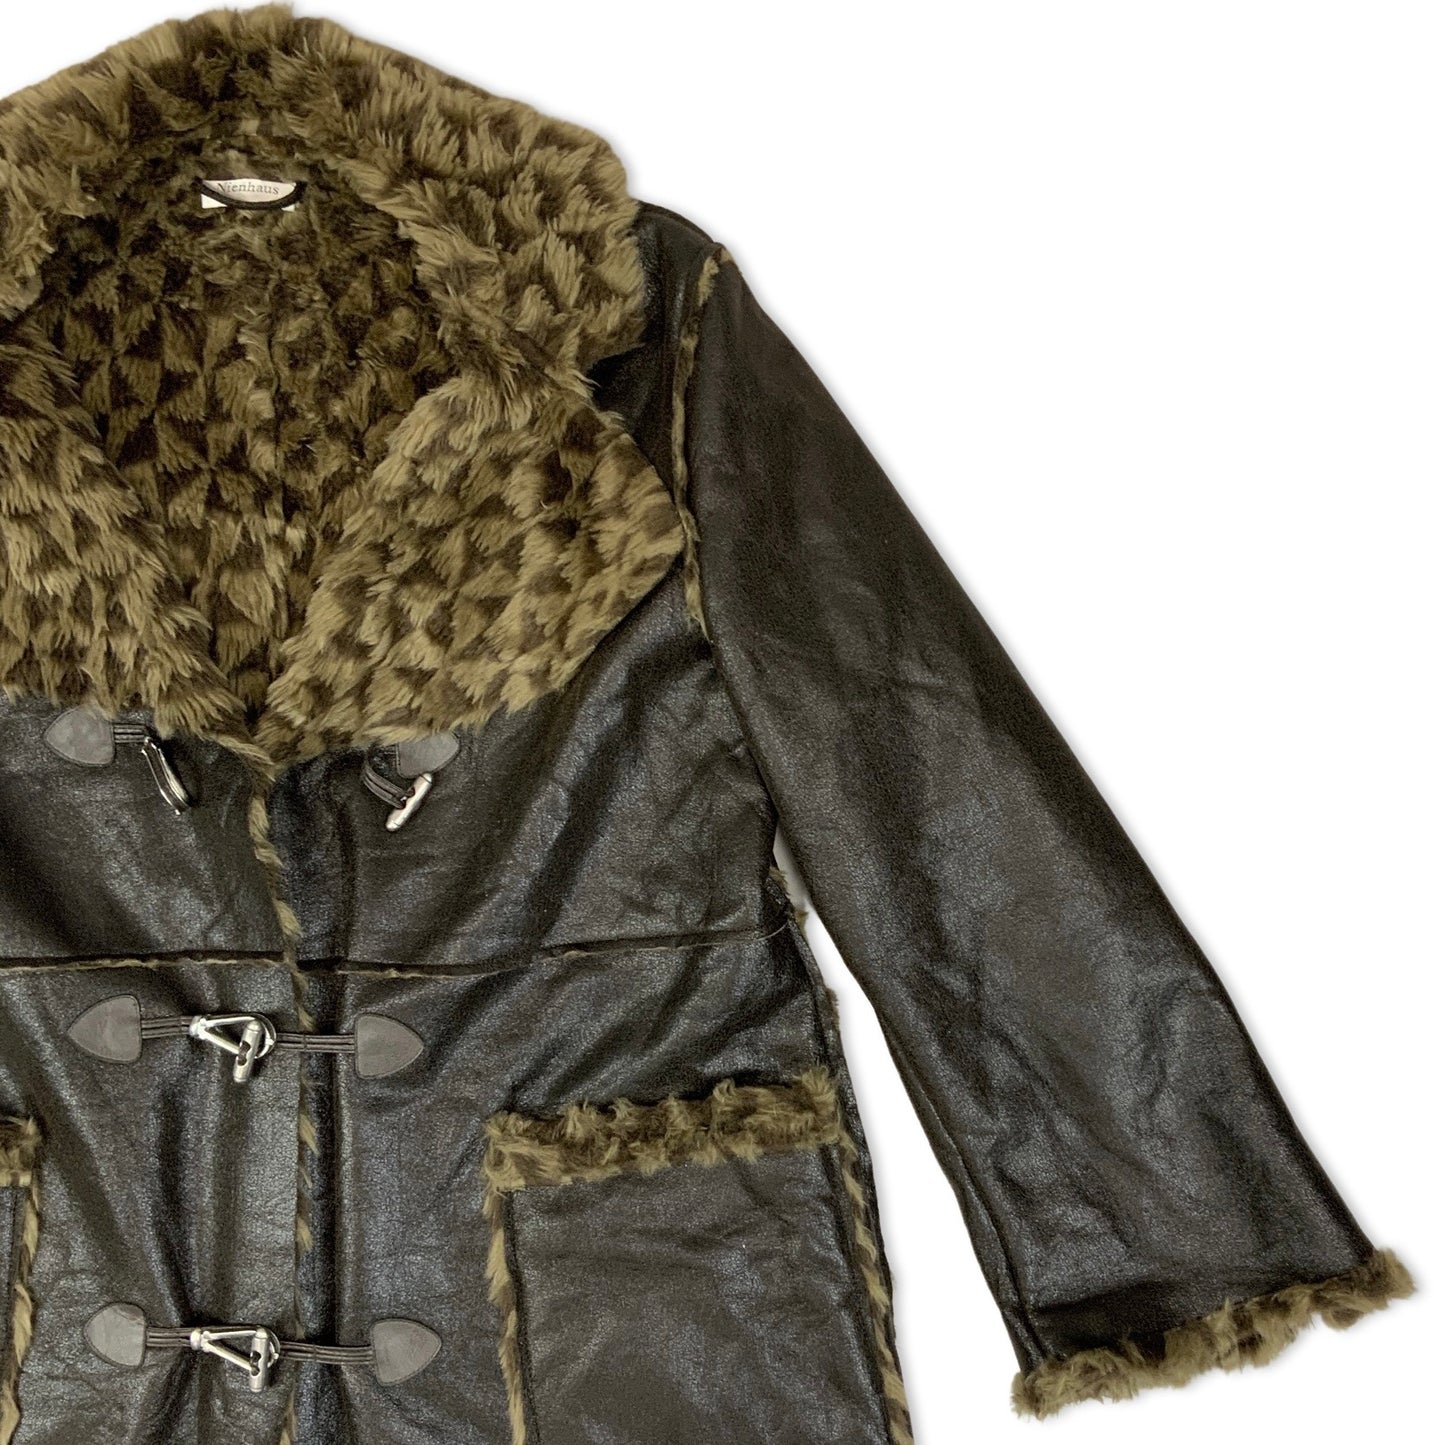 Vintage 90s Brown Shearling Coat with Printed Faux Fur Lining 16 18 20